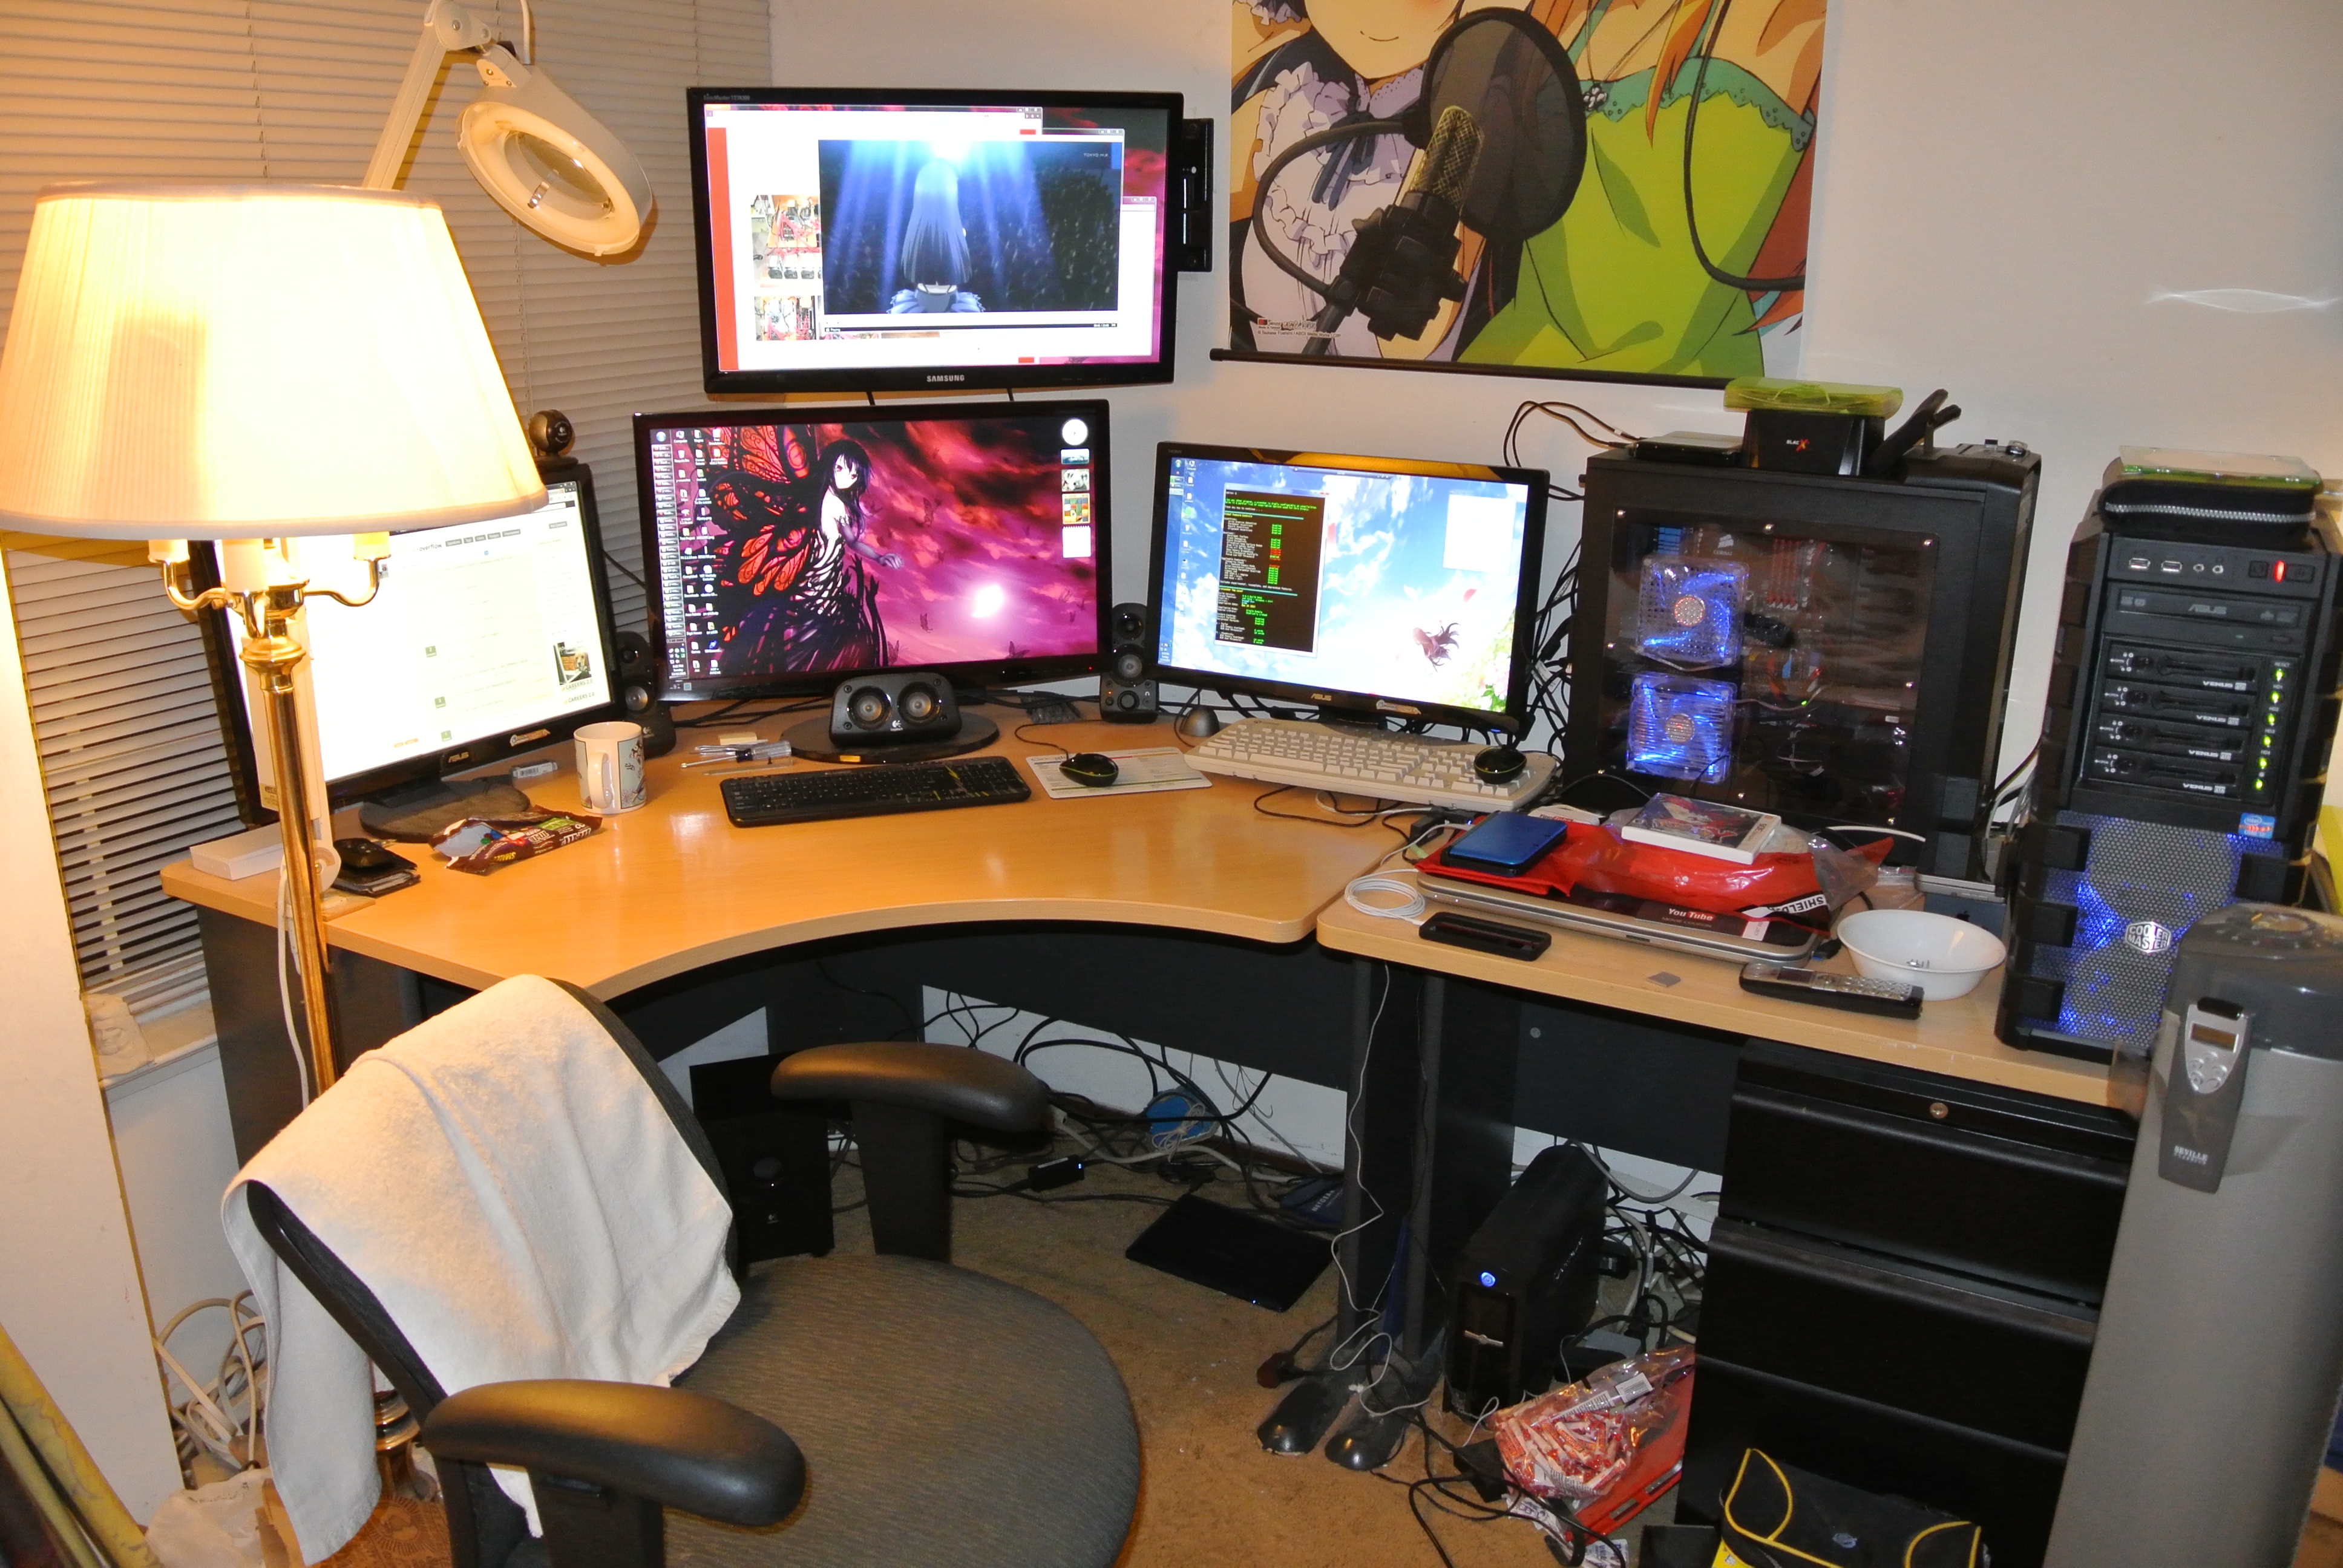 Simple What Is The Best Desktop For Working From Home for Streaming